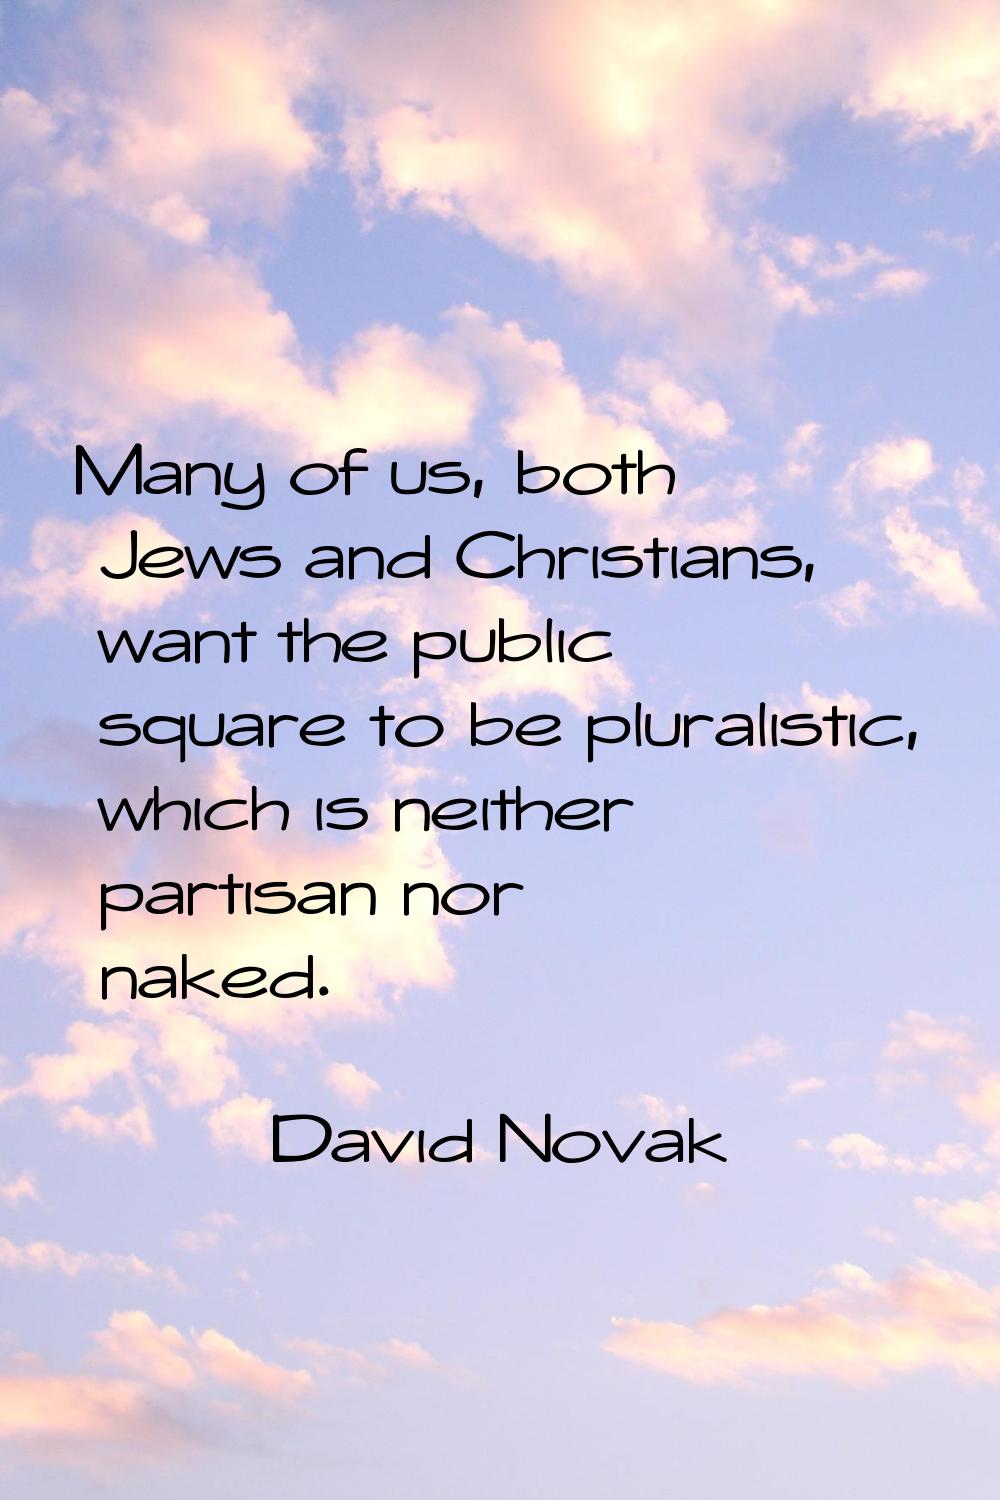 Many of us, both Jews and Christians, want the public square to be pluralistic, which is neither pa